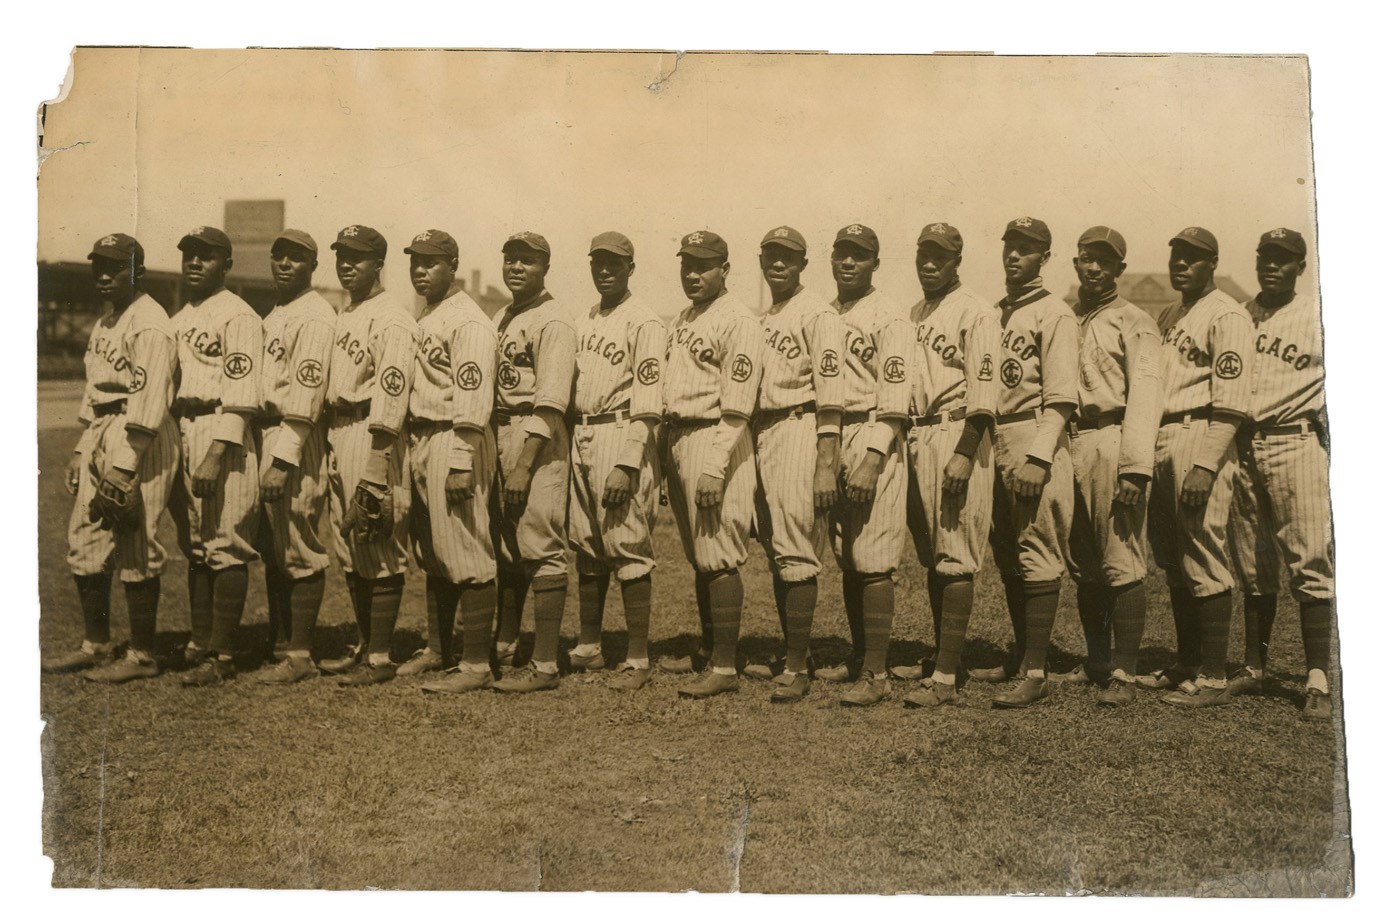 Negro League, Latin, Japanese & International Base - 1921 National League Champion Chicago American Giants Type I Photograph with Cristobal Torriente (from Rube Foster Family)